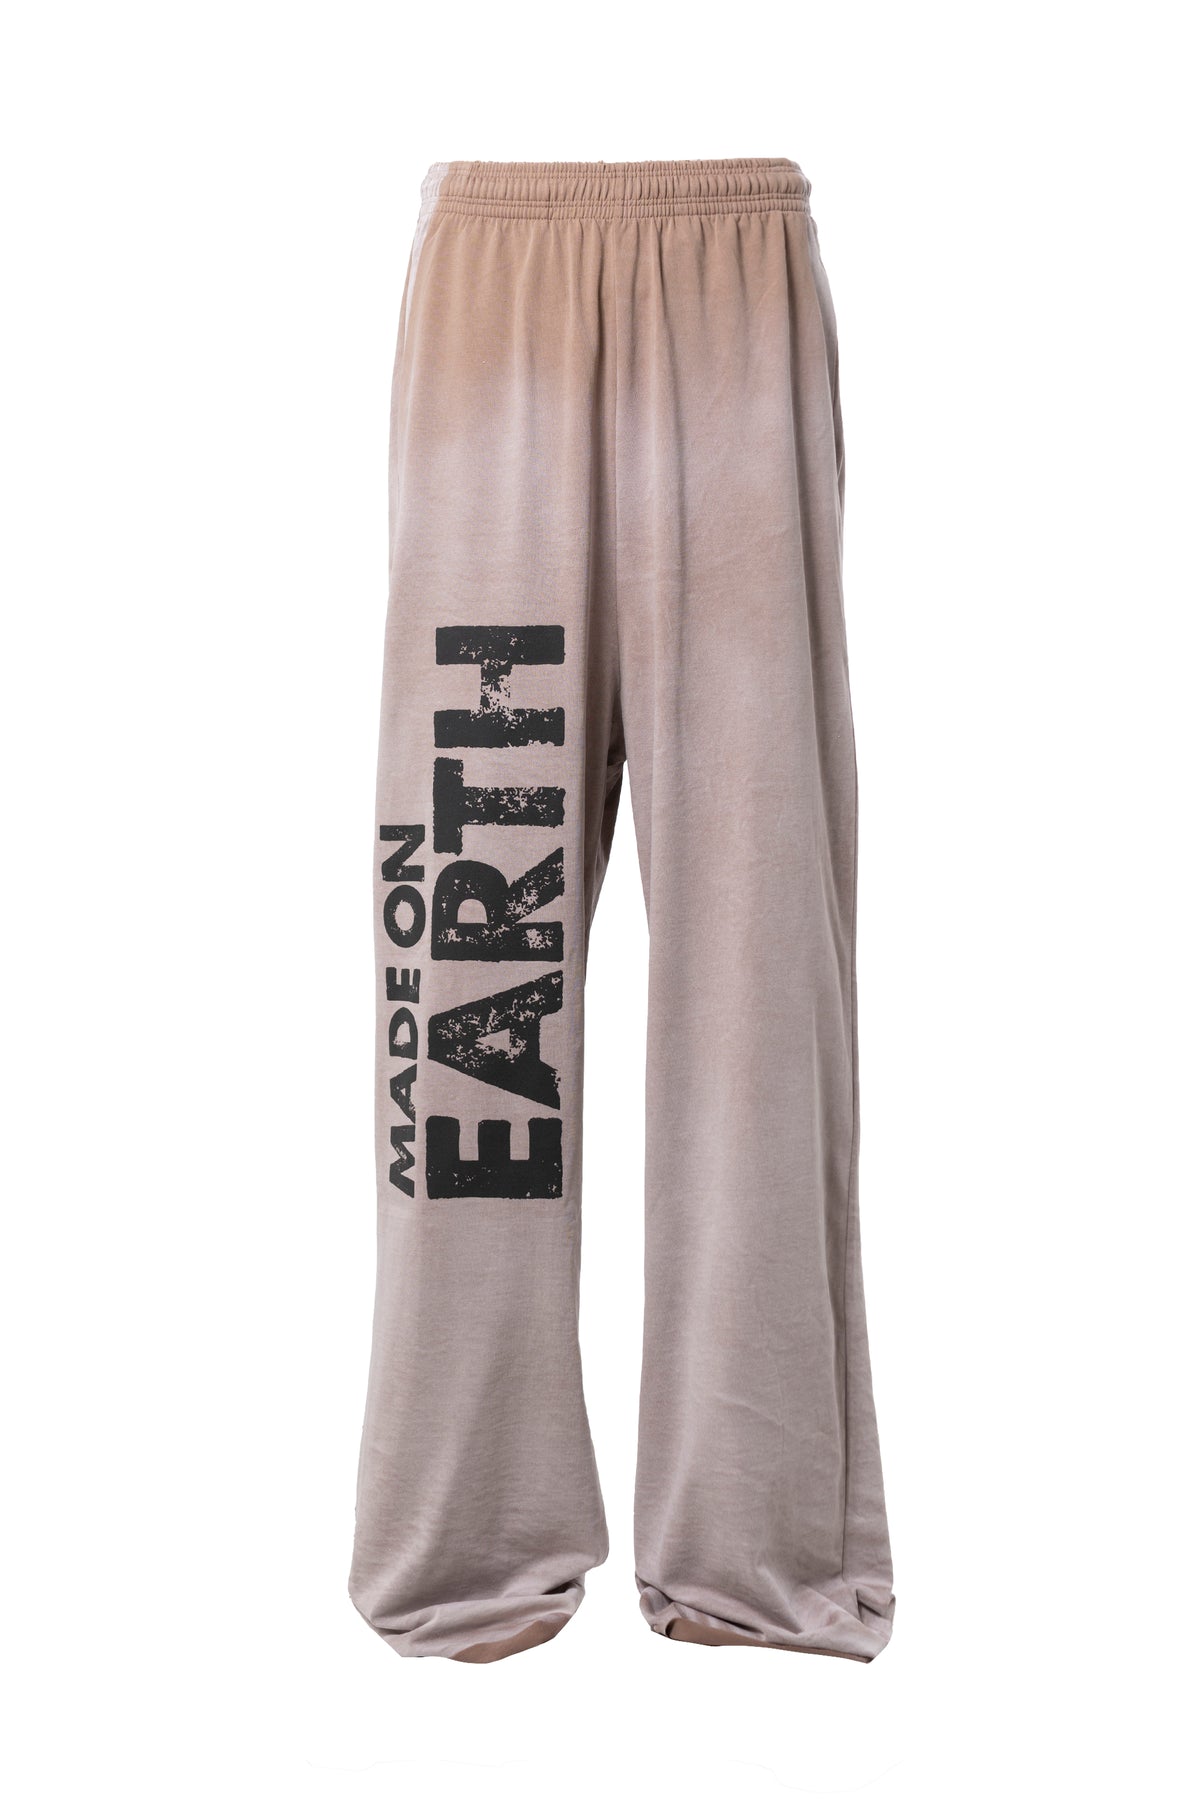 VETEMENTS MADE ON EARTH DOUBLE JERSEY SWEATPANTS / FADED BEI